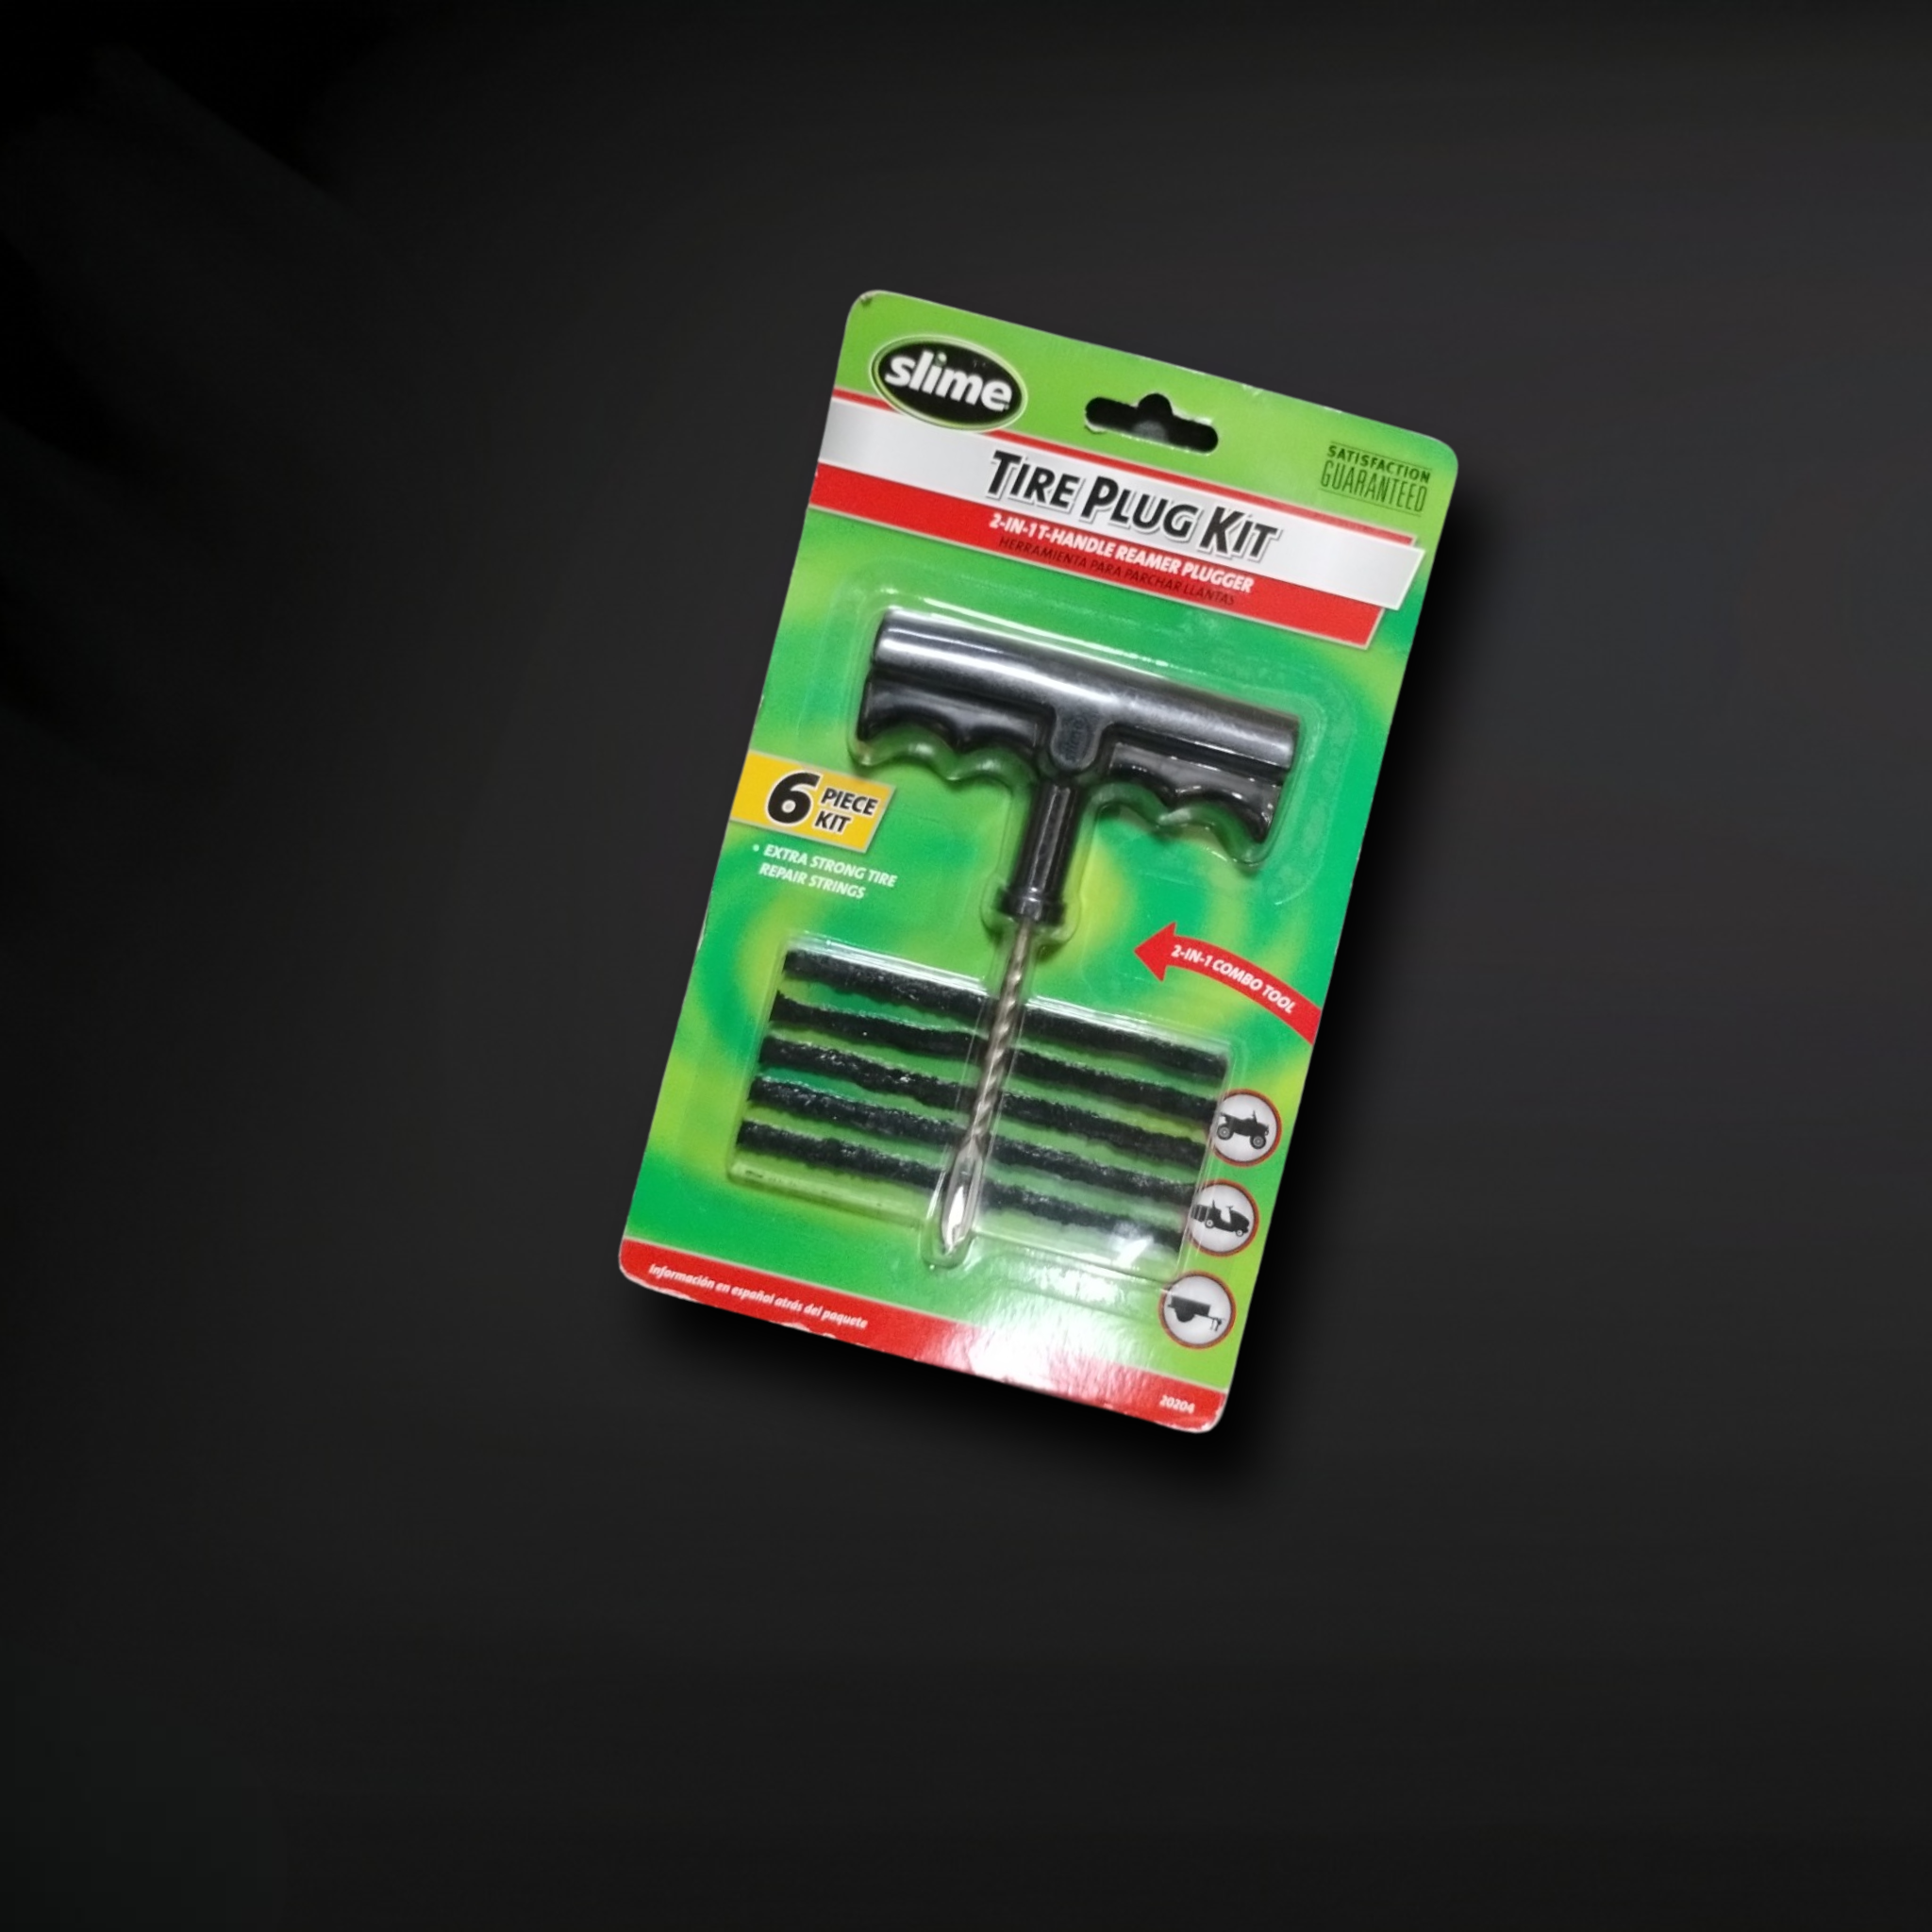 ''6-Piece Tire Repair Kit (2-in-1 Rougher and Plug Placer, with Tire Repair Strips)''''''''''''''''''''''''''''''''''''